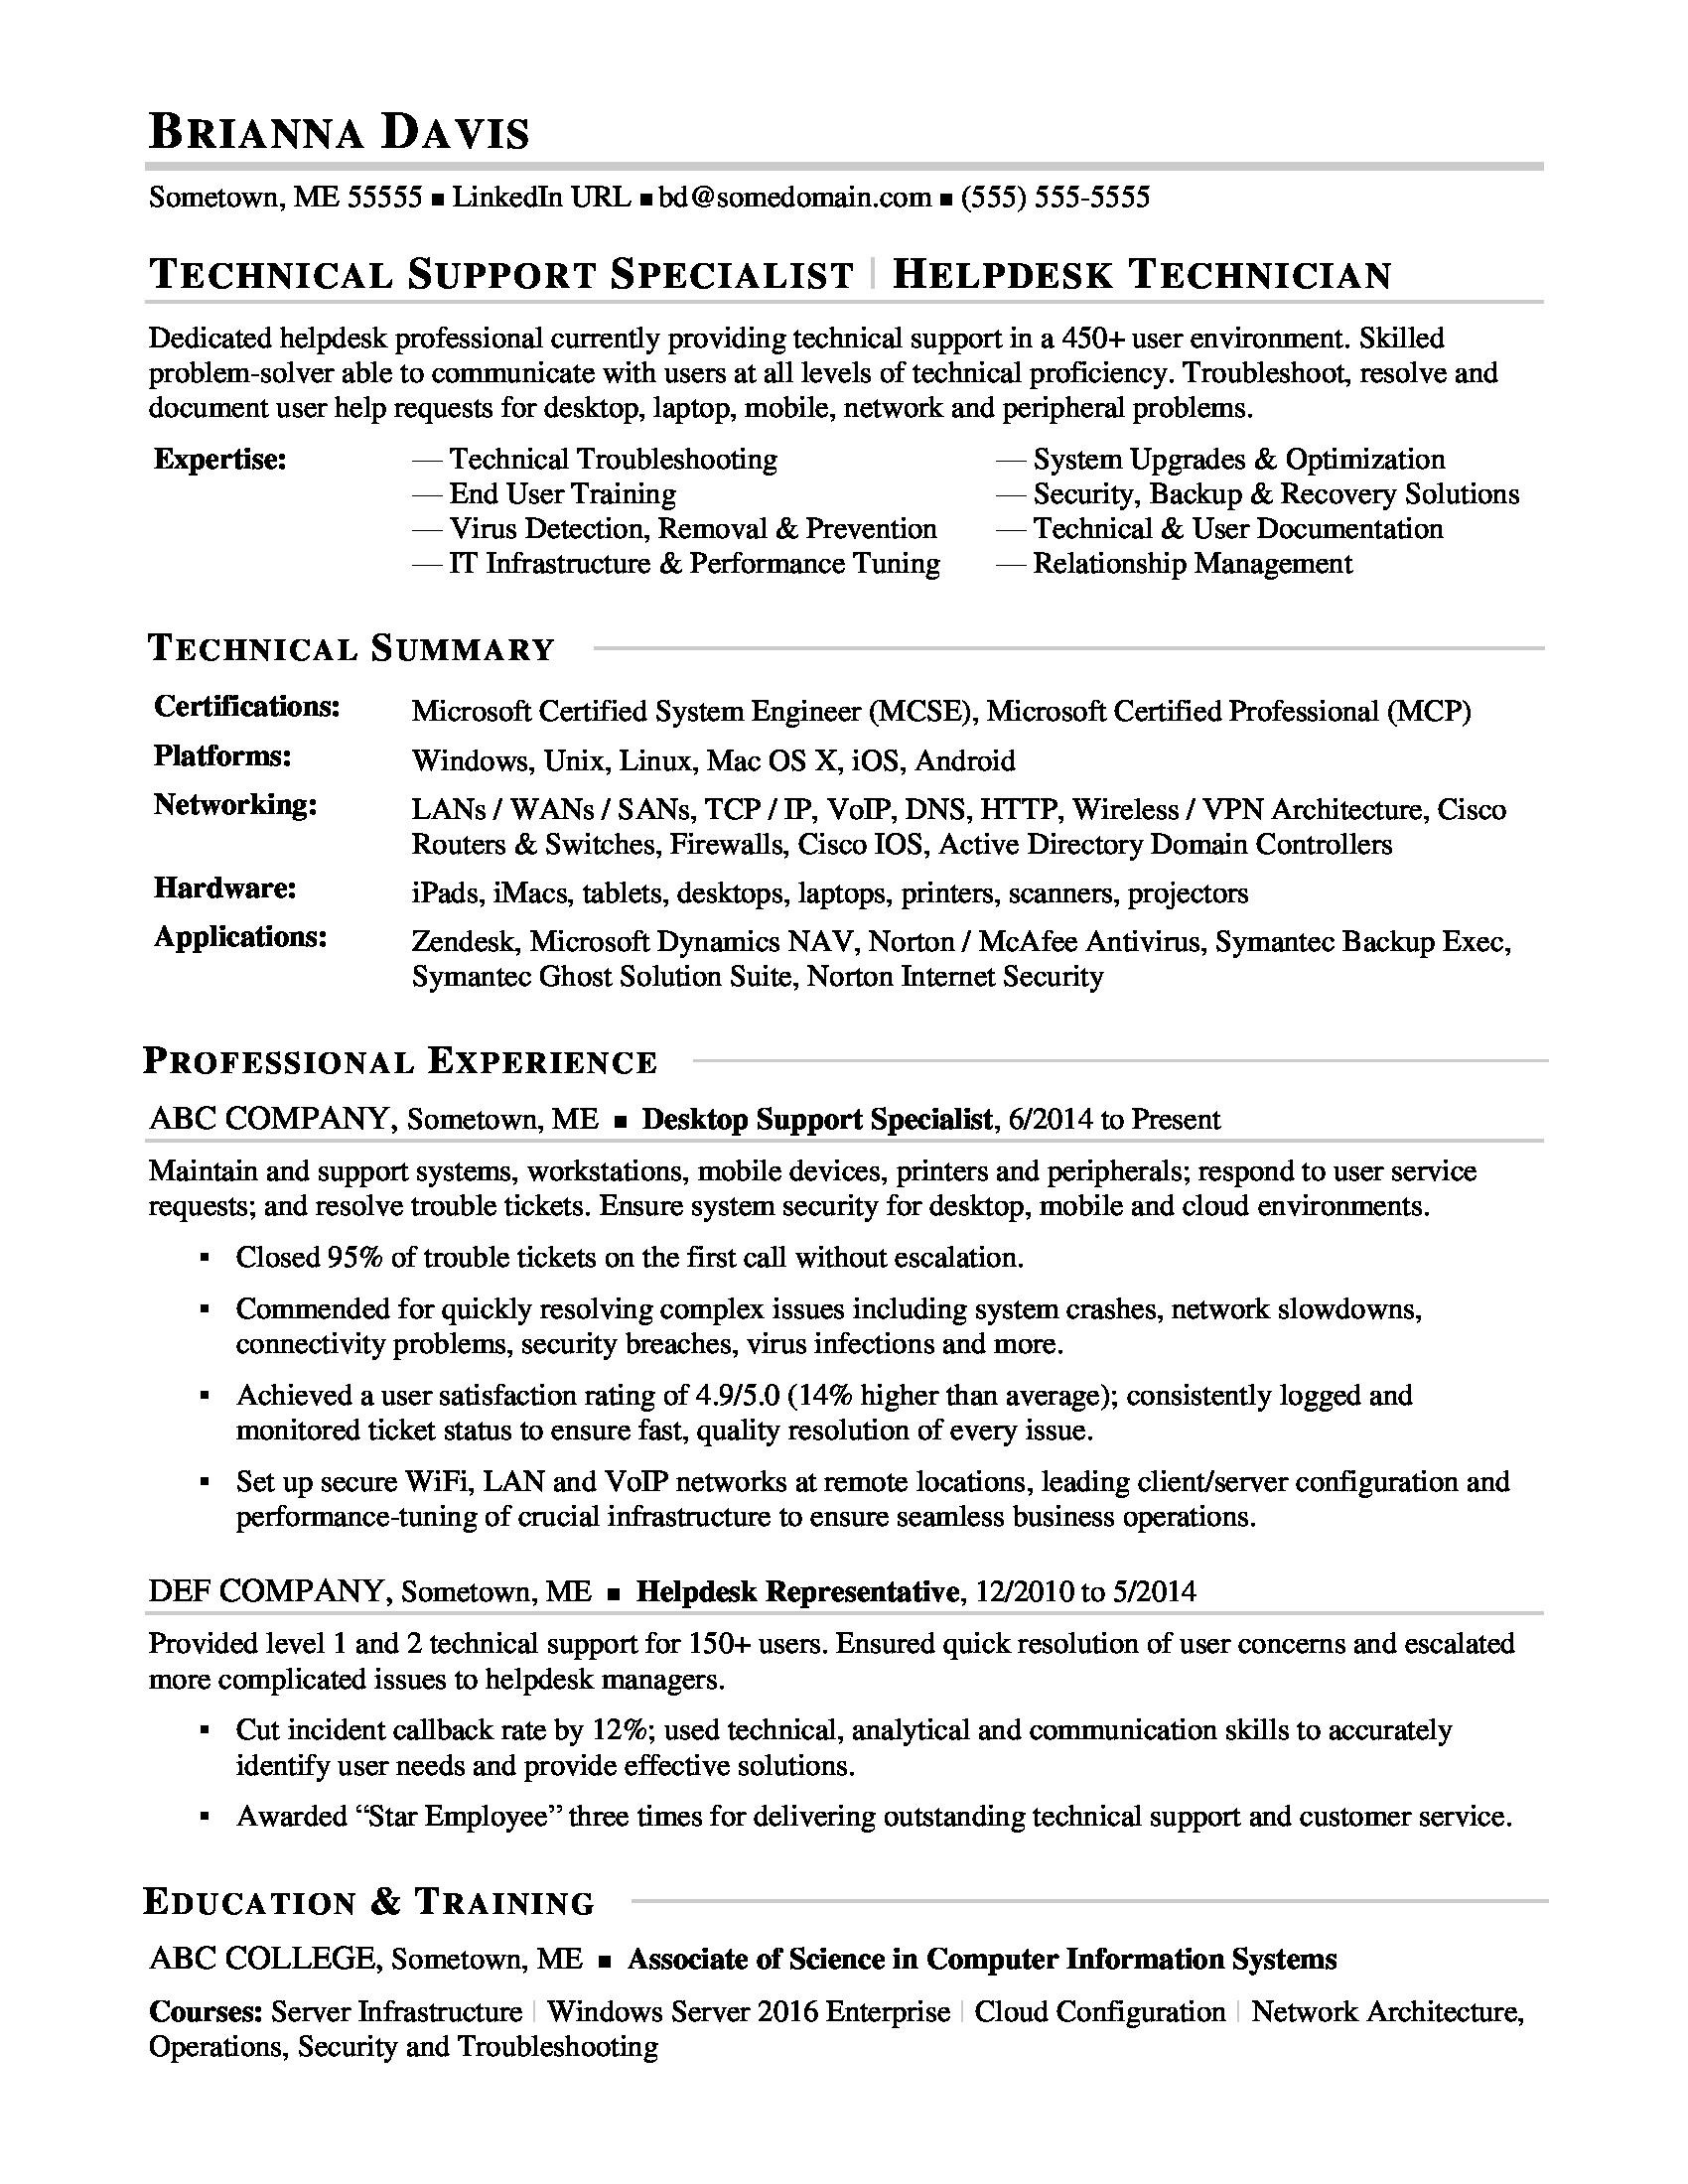 Technical Support Resume Template and Sample Sample Resume for Experienced It Help Desk Employee Monster.com